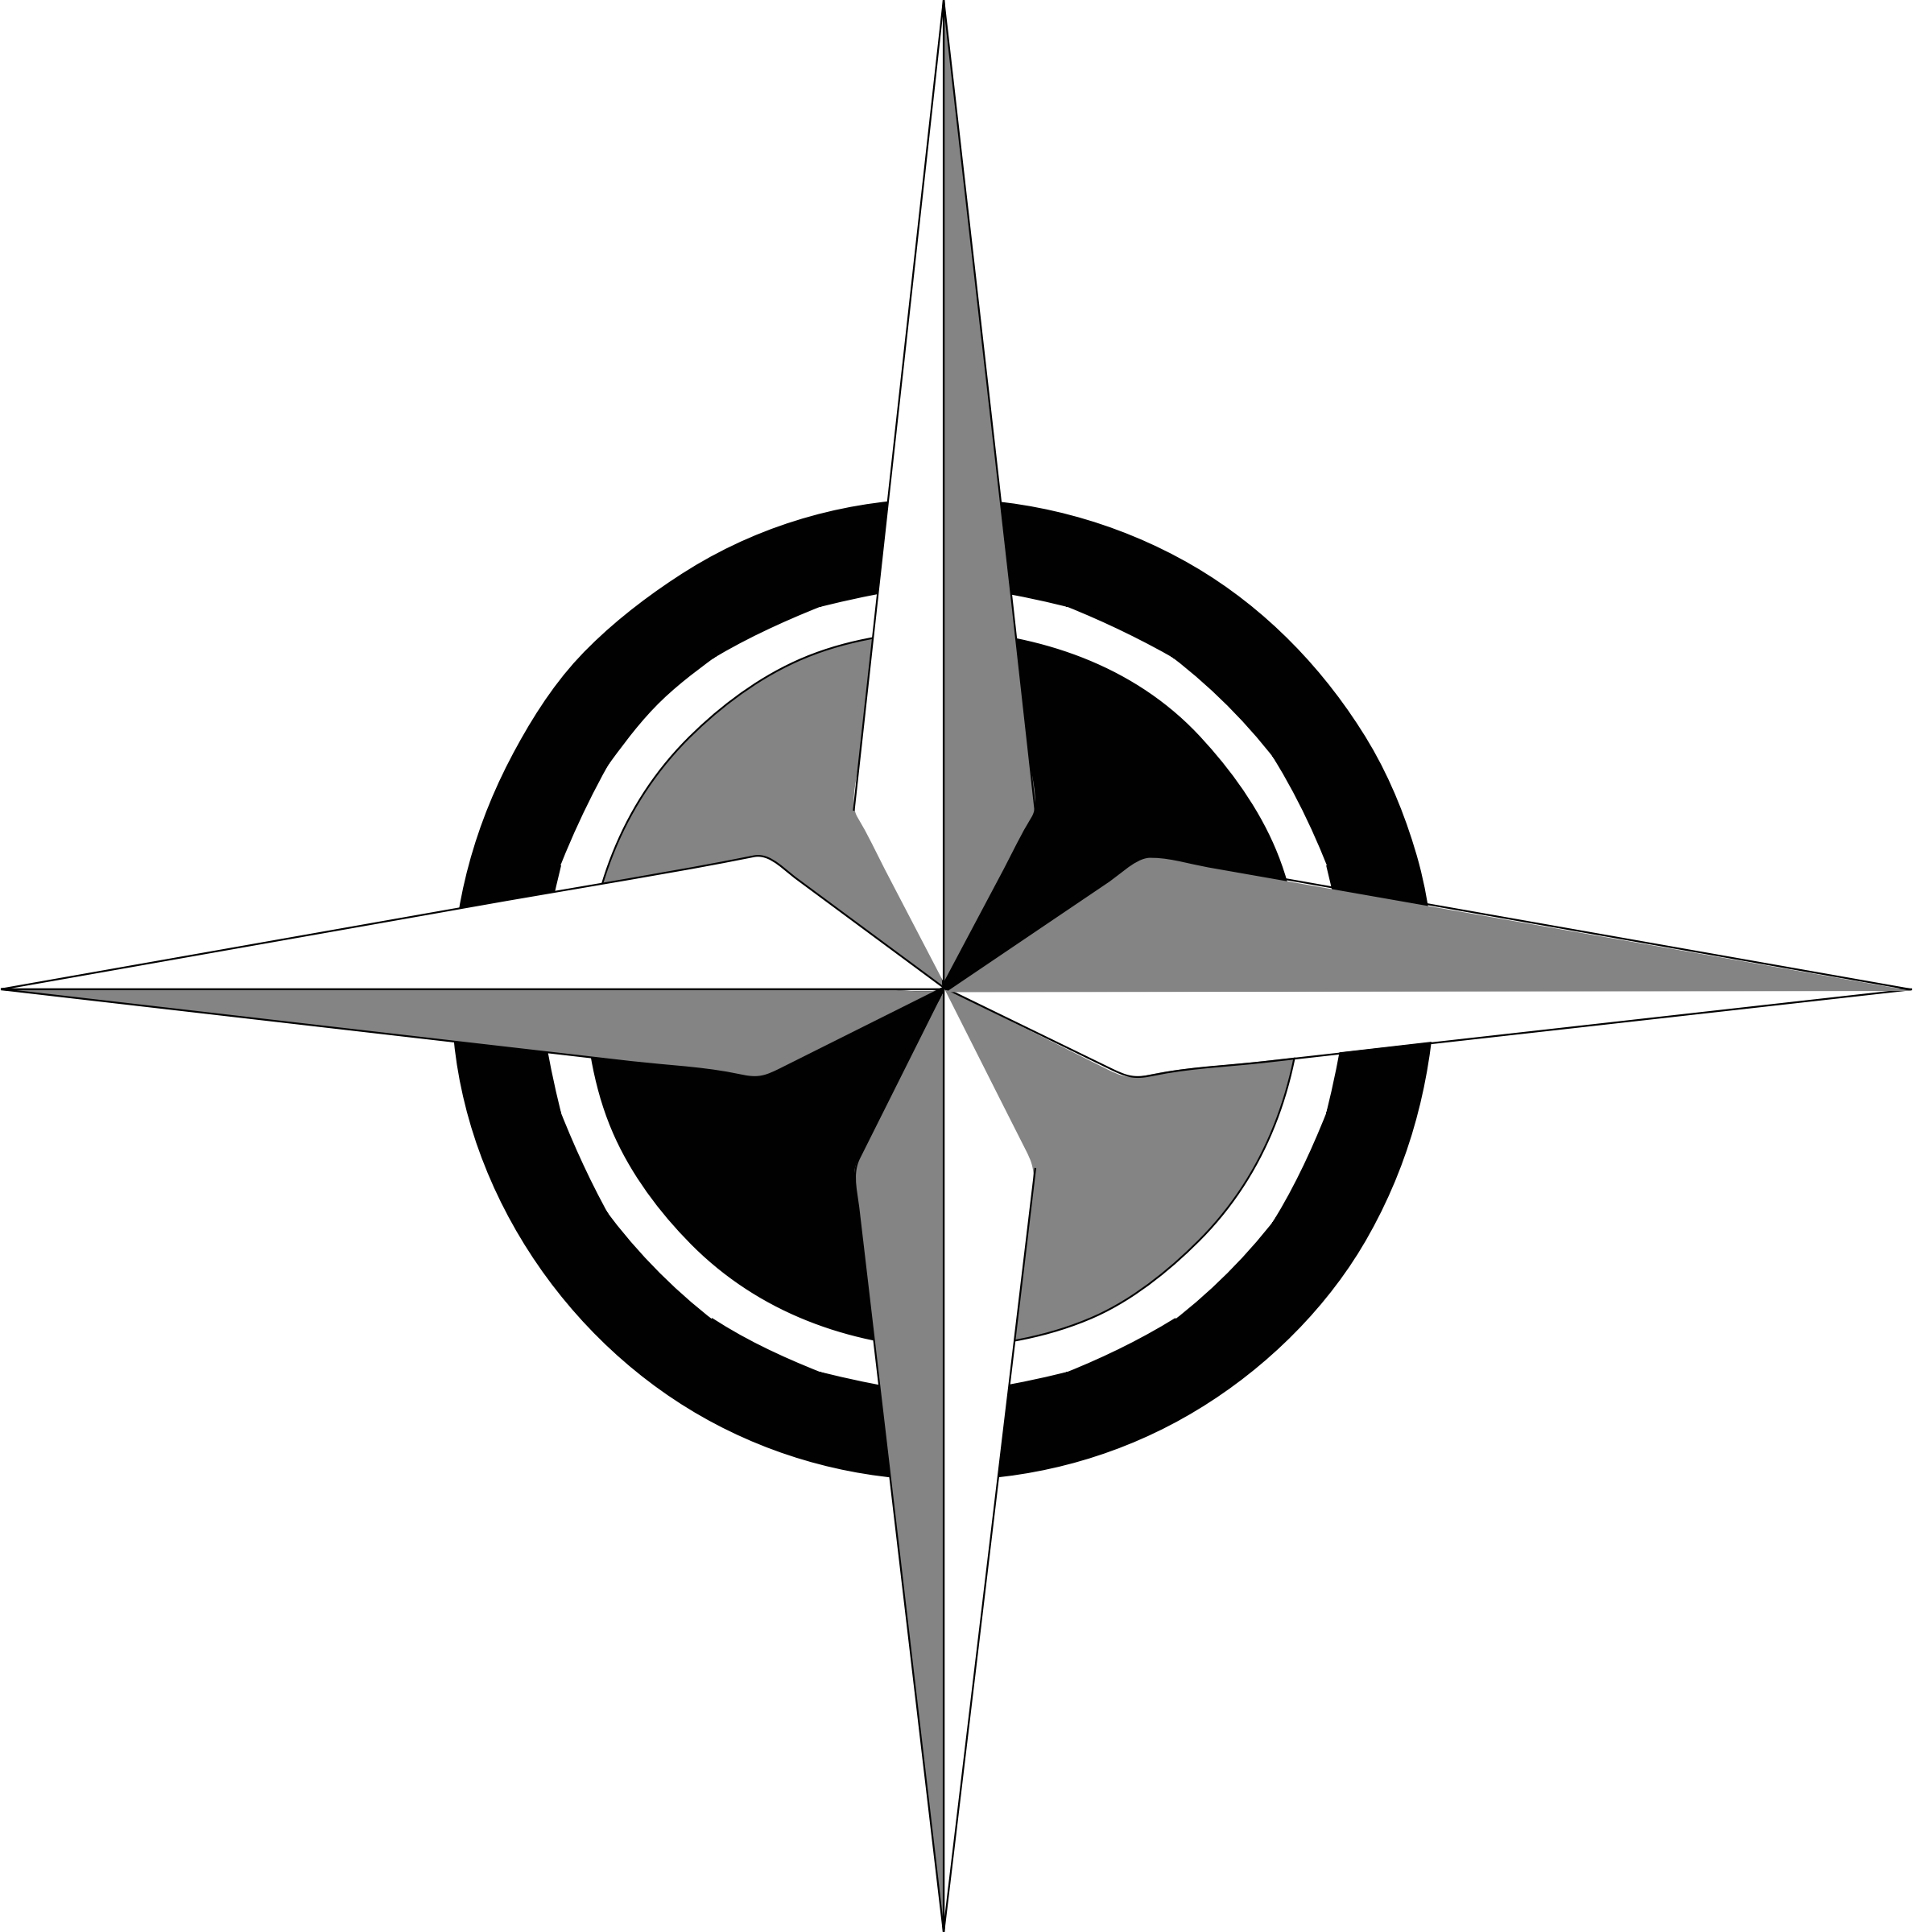 This Free Icons Png Design Of Compass Rose 1 Hdpng.com  - Compass Rose Black And White, Transparent background PNG HD thumbnail